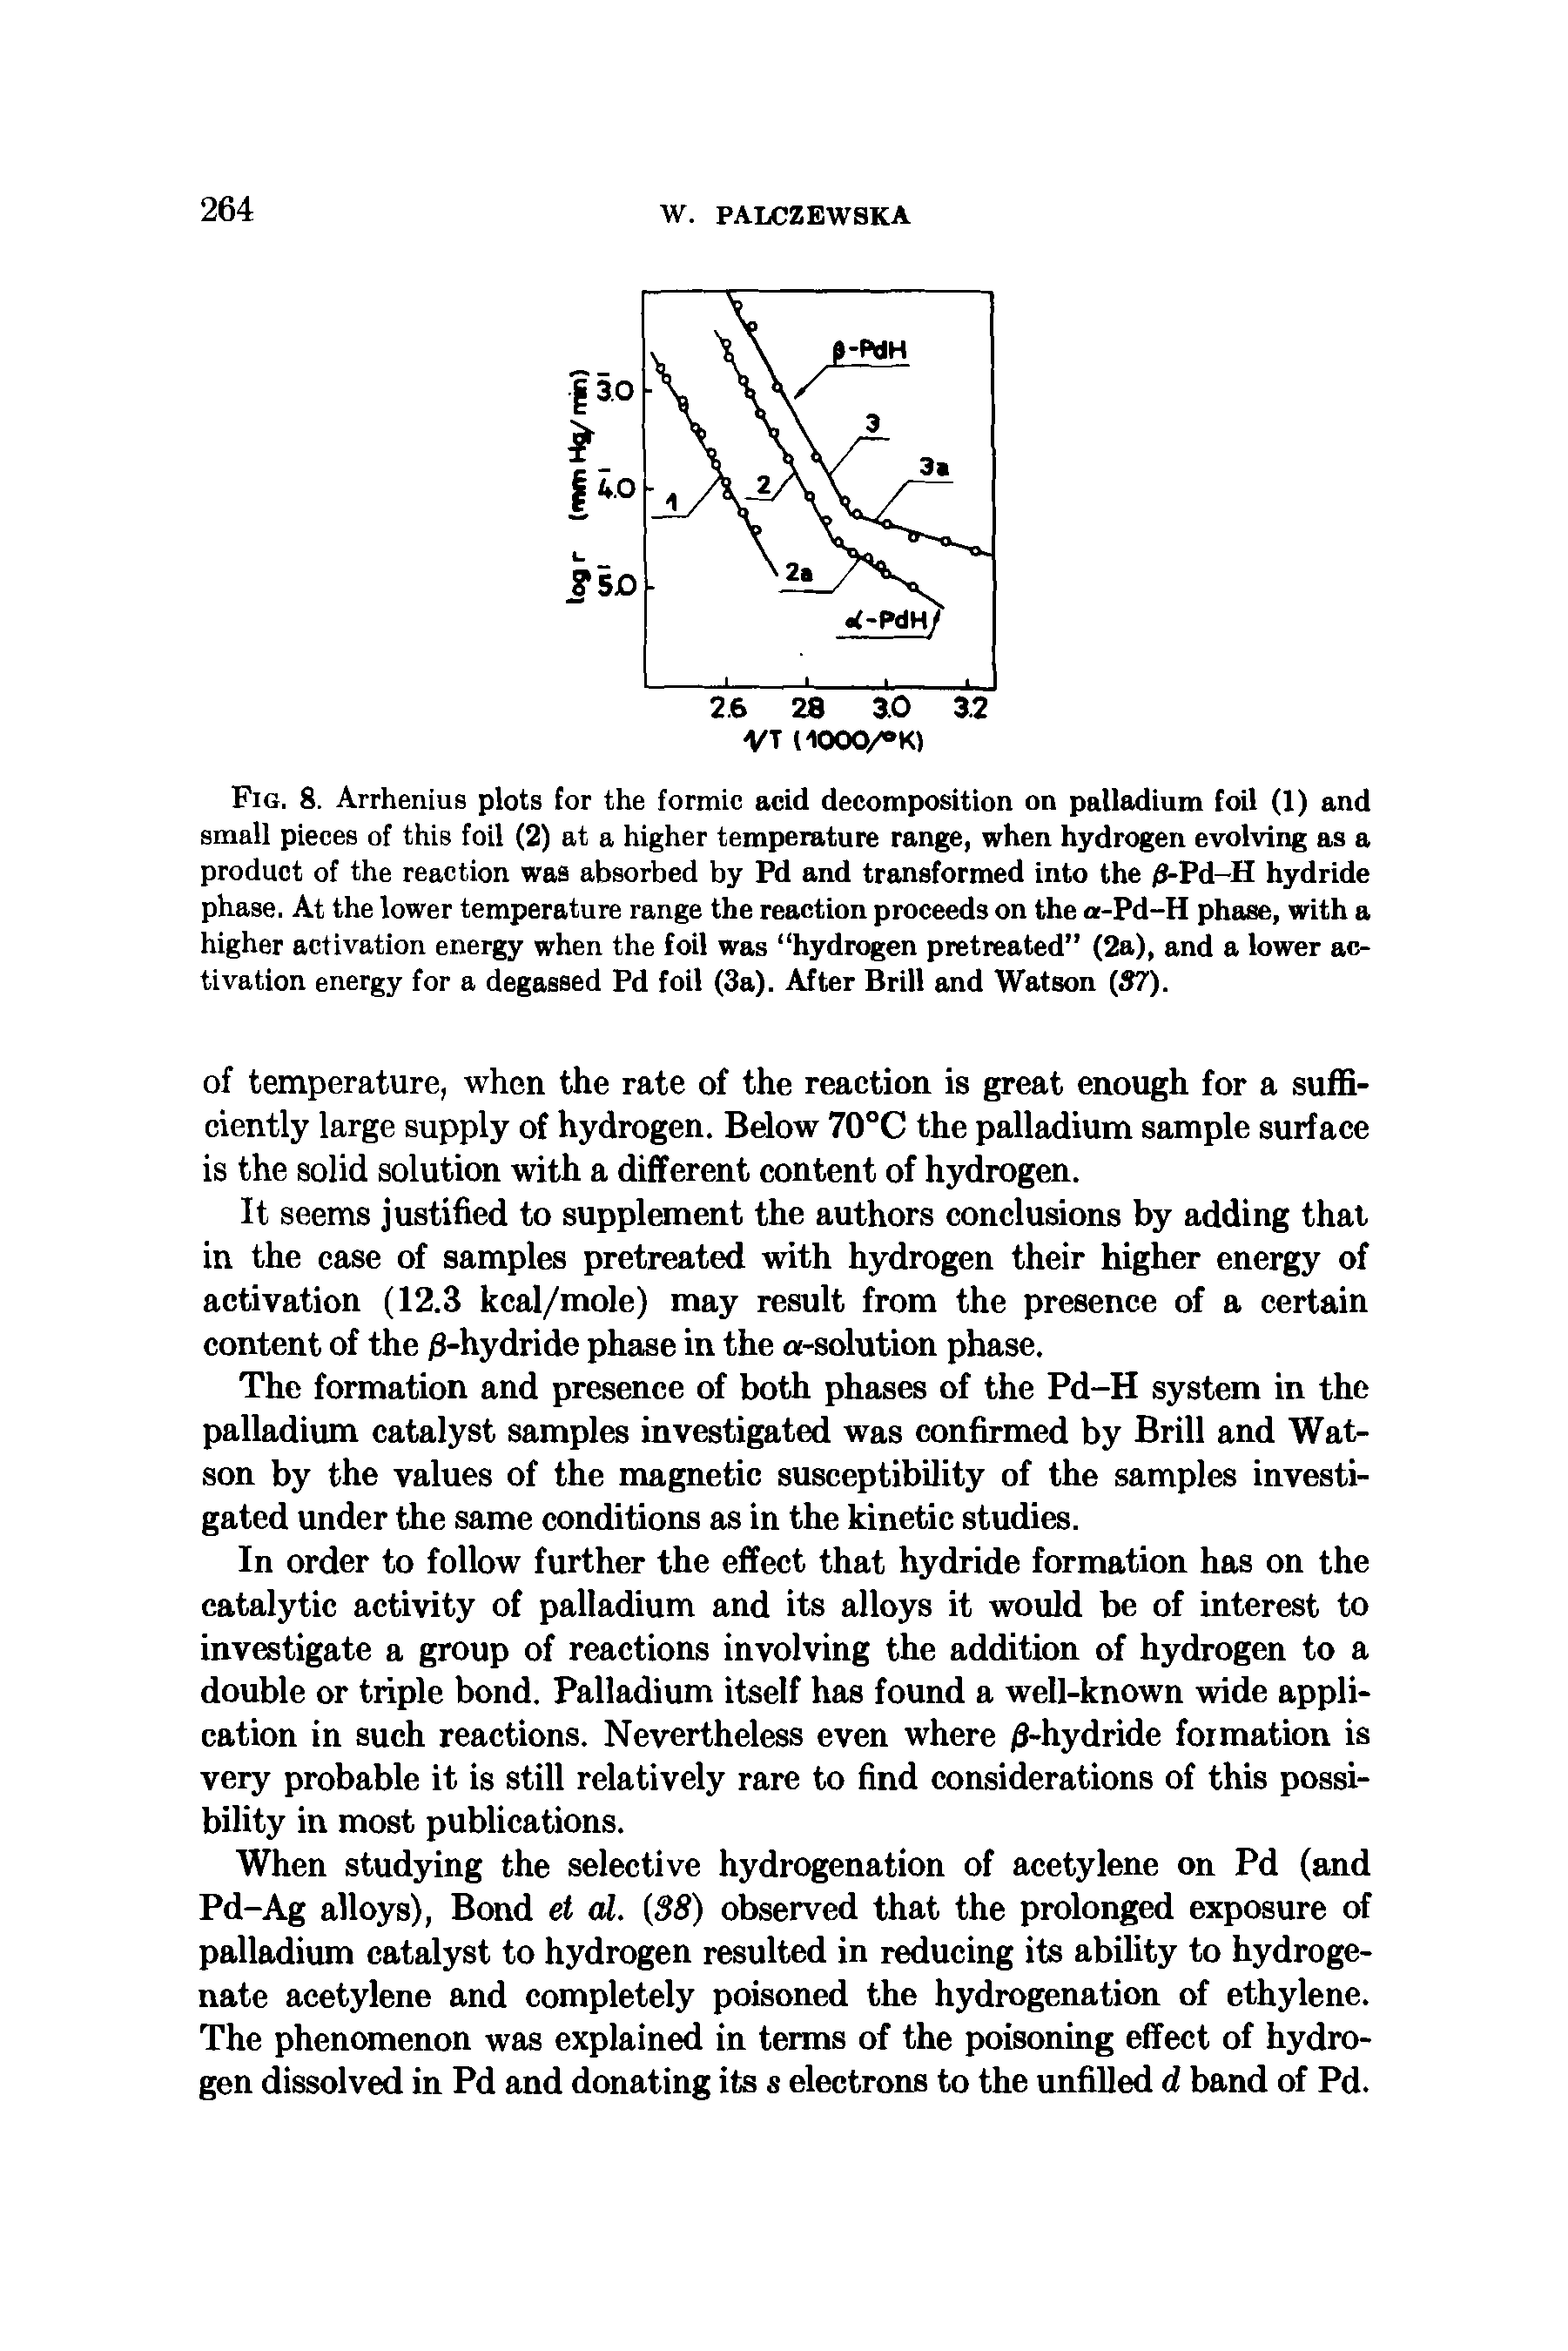 Fig. 8. Arrhenius plots for the formic acid decomposition on palladium foil (1) and small pieces of this foil (2) at a higher temperature range, when hydrogen evolving as a product of the reaction was absorbed by Pd and transformed into the /3-Pd-H hydride phase. At the lower temperature range the reaction proceeds on the a-Pd-H phase, with a higher activation energy when the foil was hydrogen pretreated (2a), and a lower activation energy for a degassed Pd foil (3a). After Brill and Watson (57).